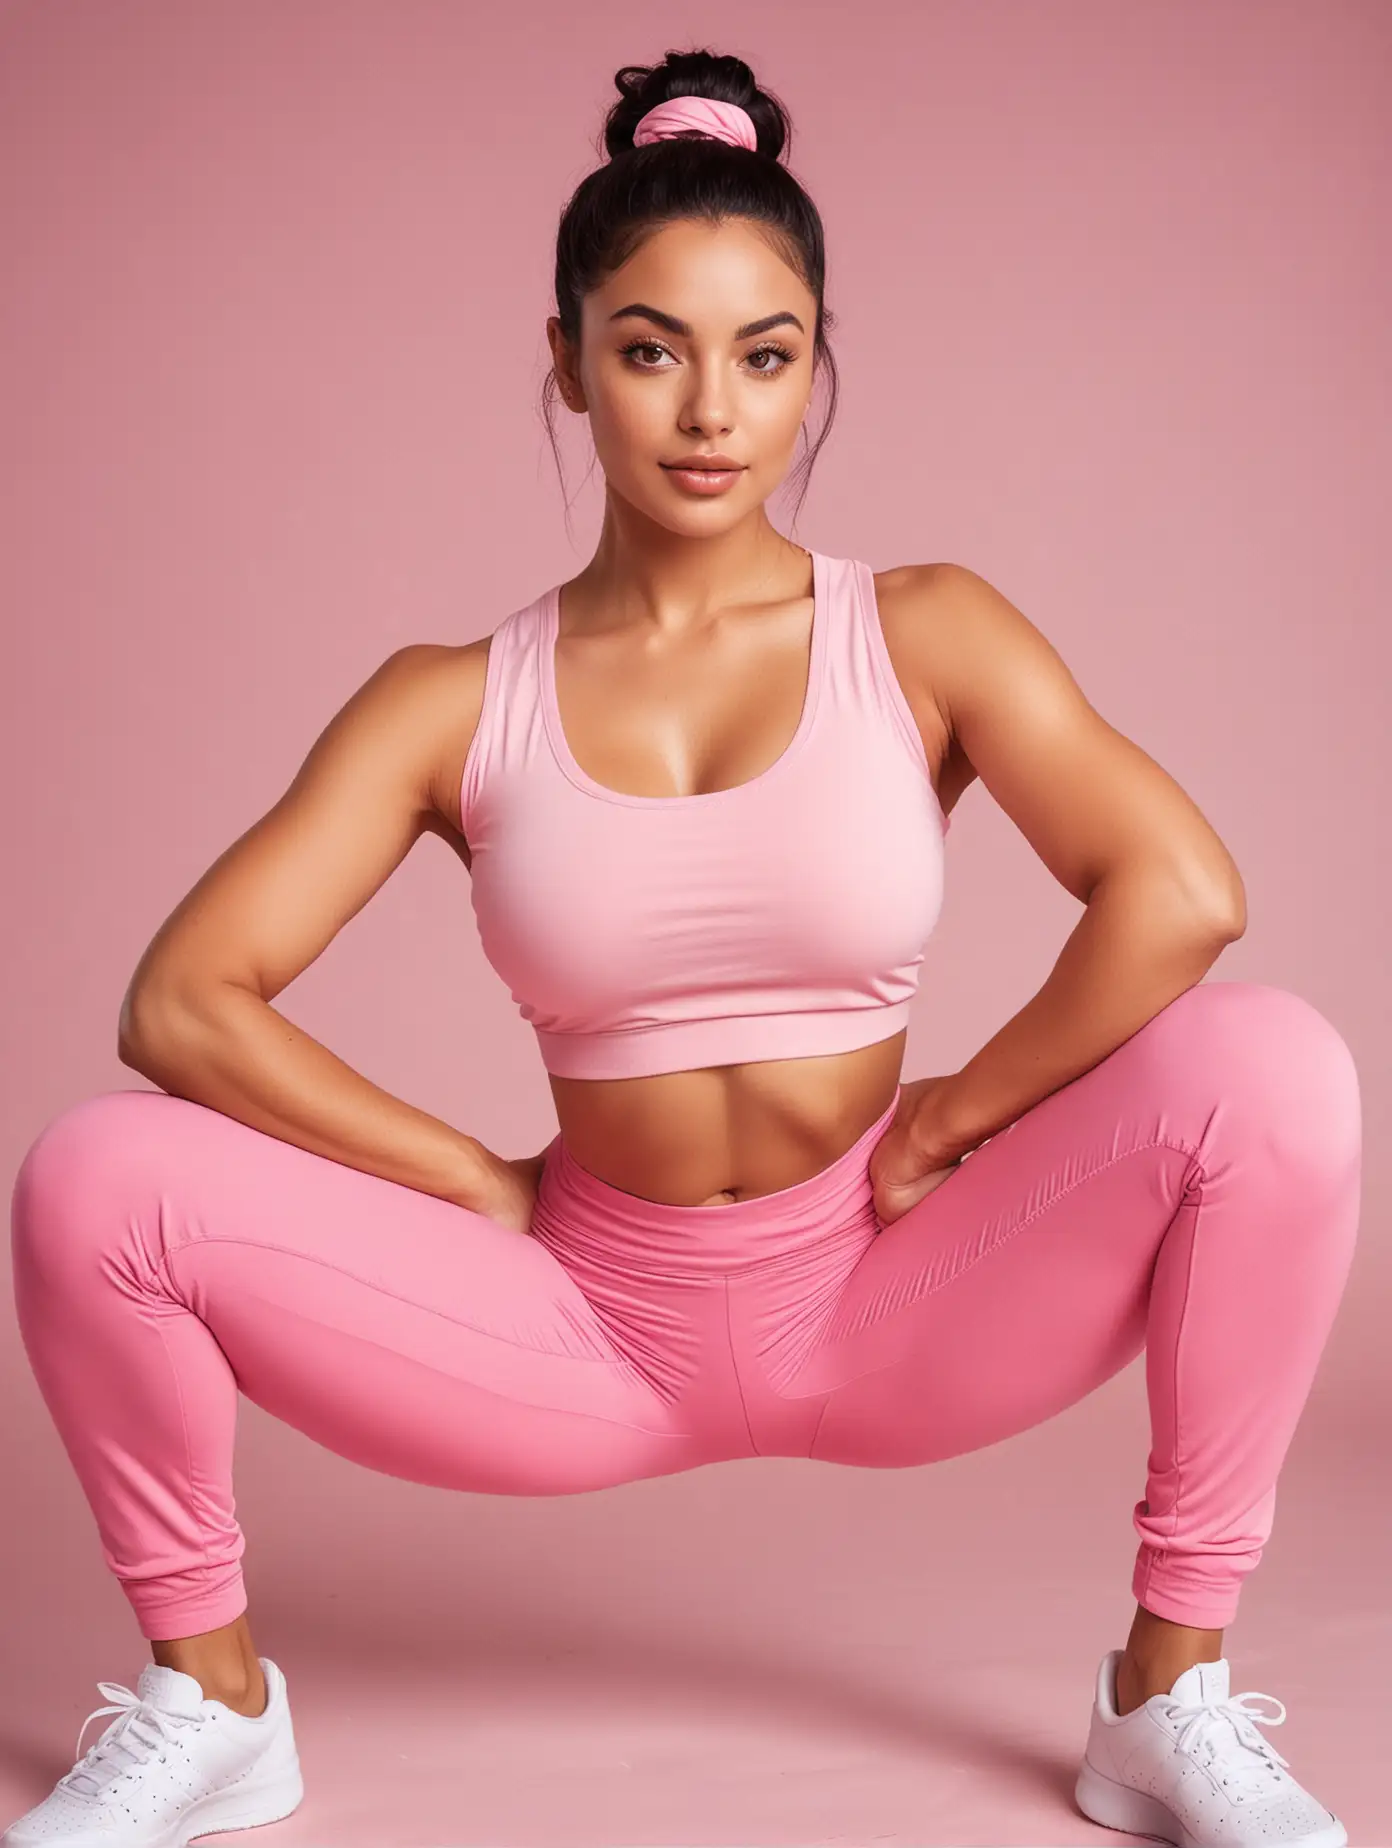 Athletic Latina Woman in Pink Sports Attire and Sneakers